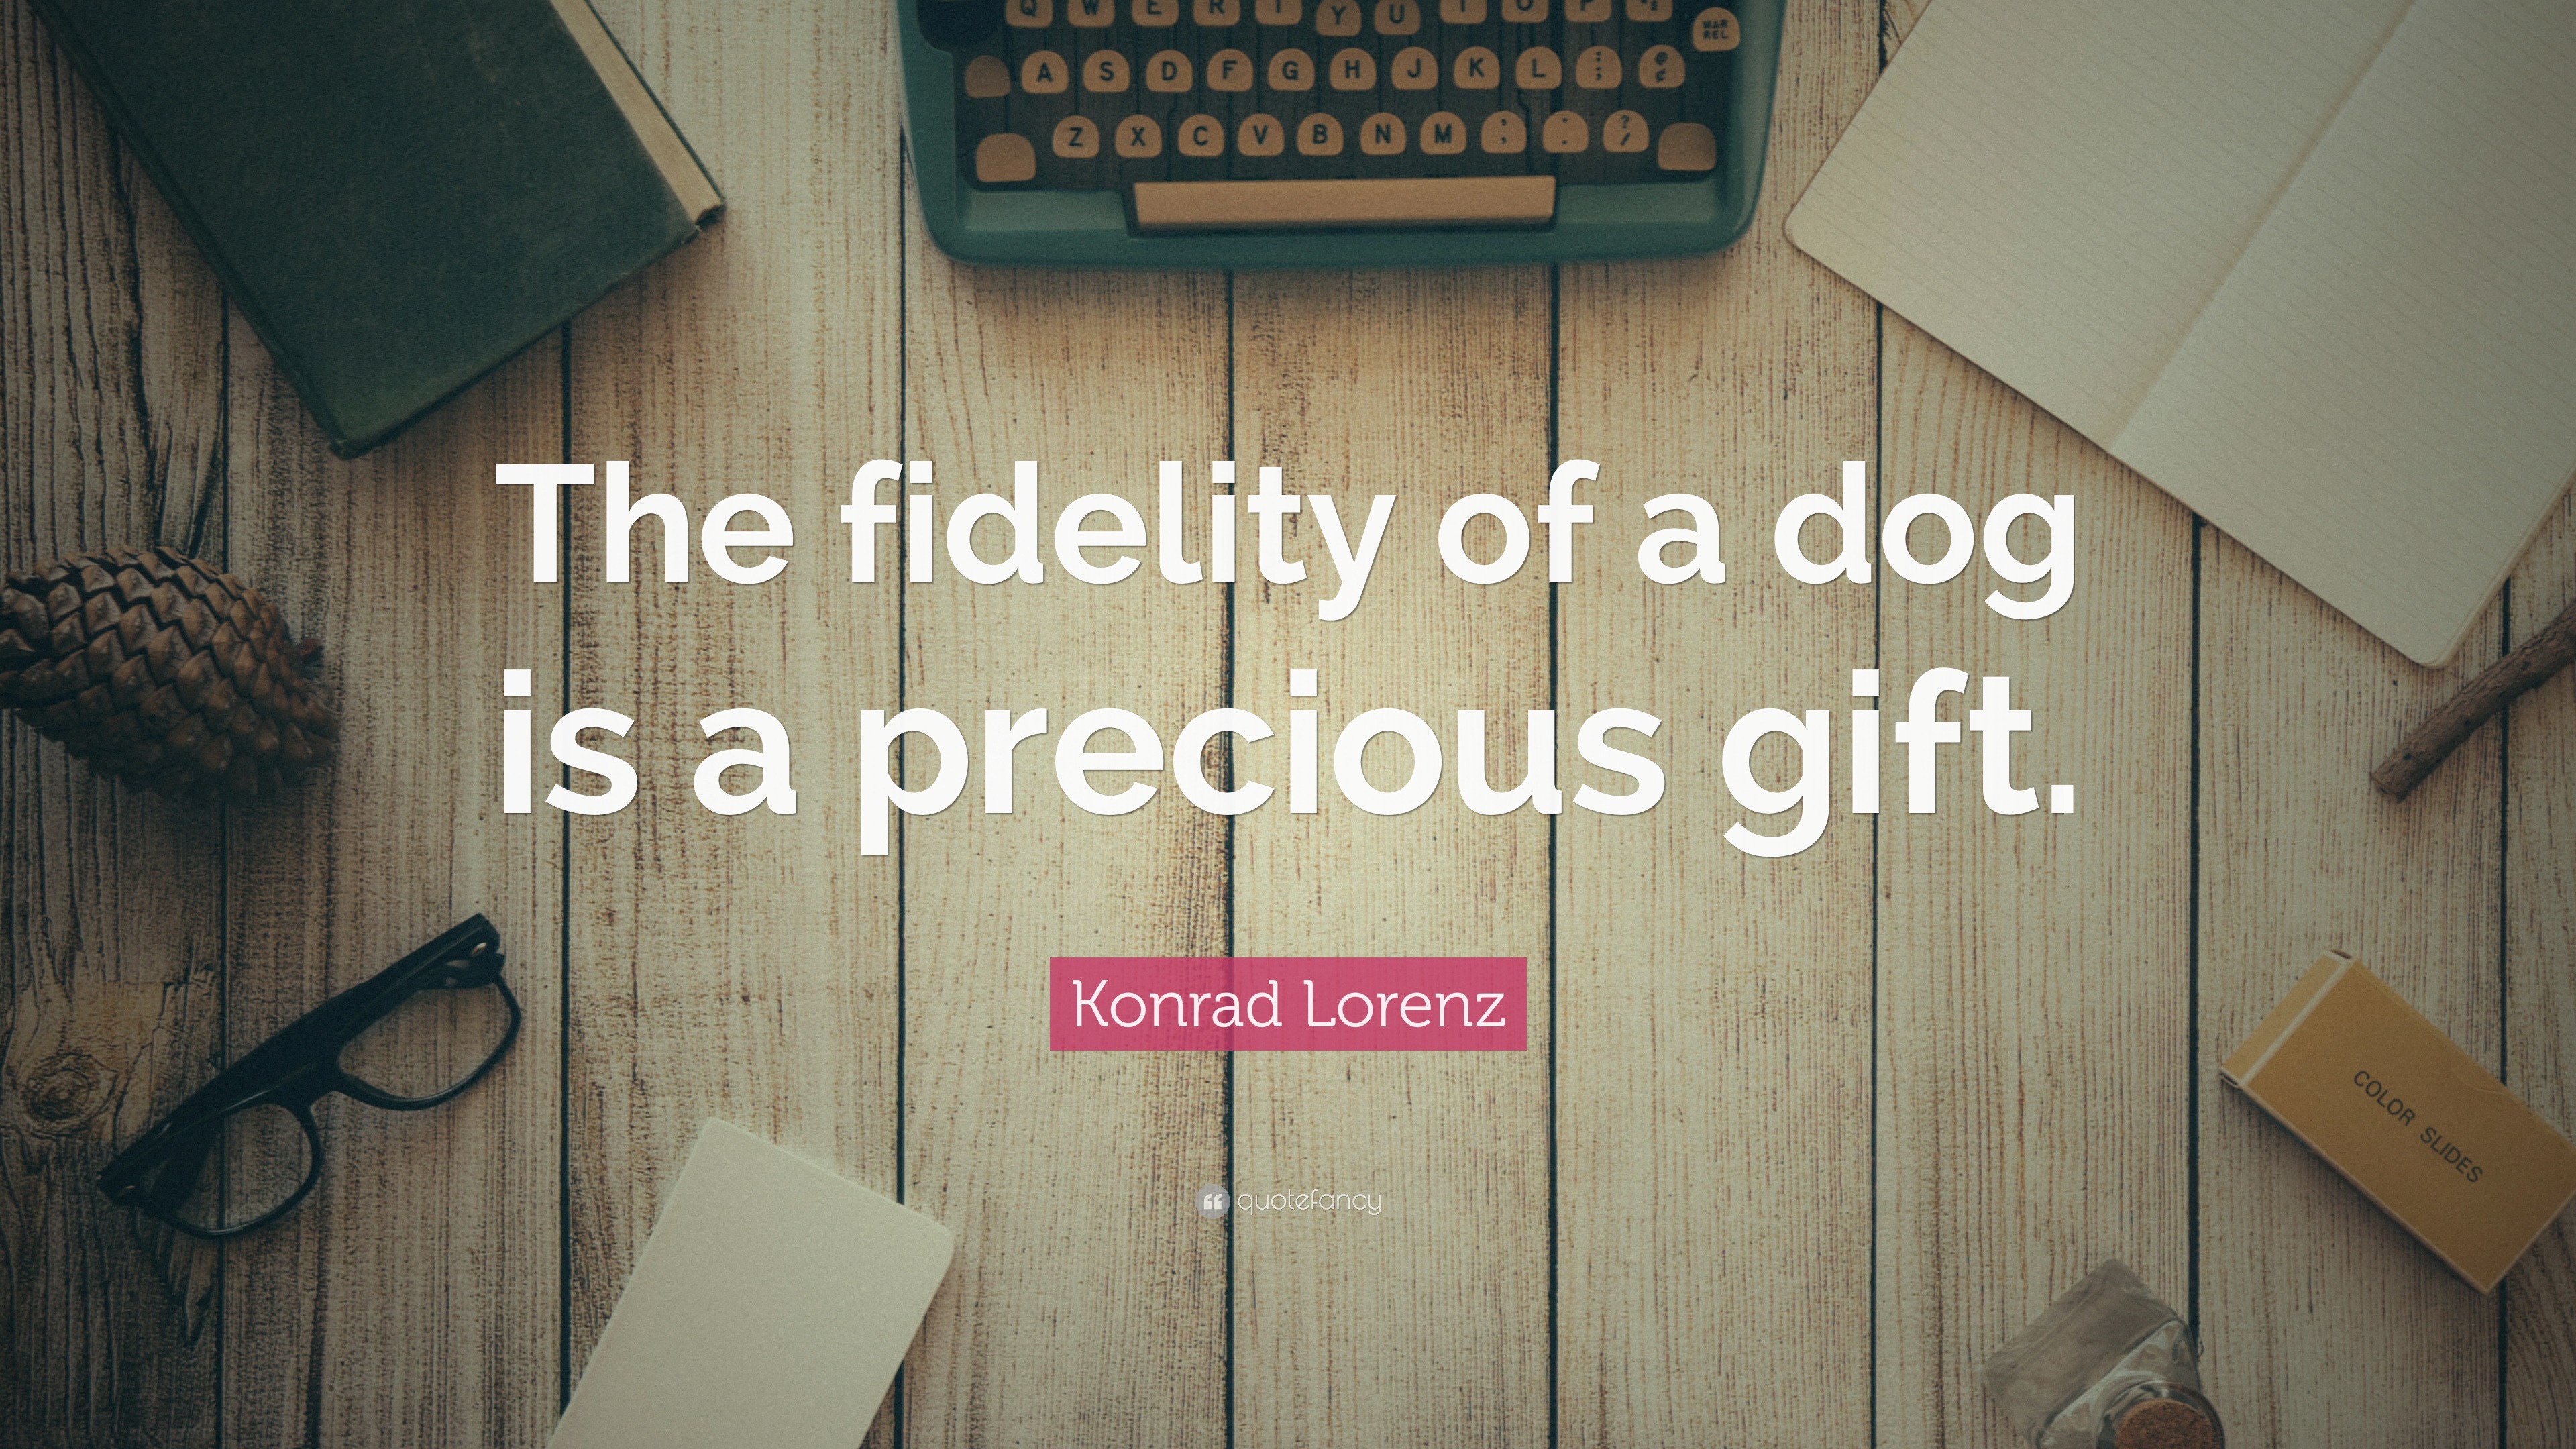 The fidelity of a dog is a precious gift. 